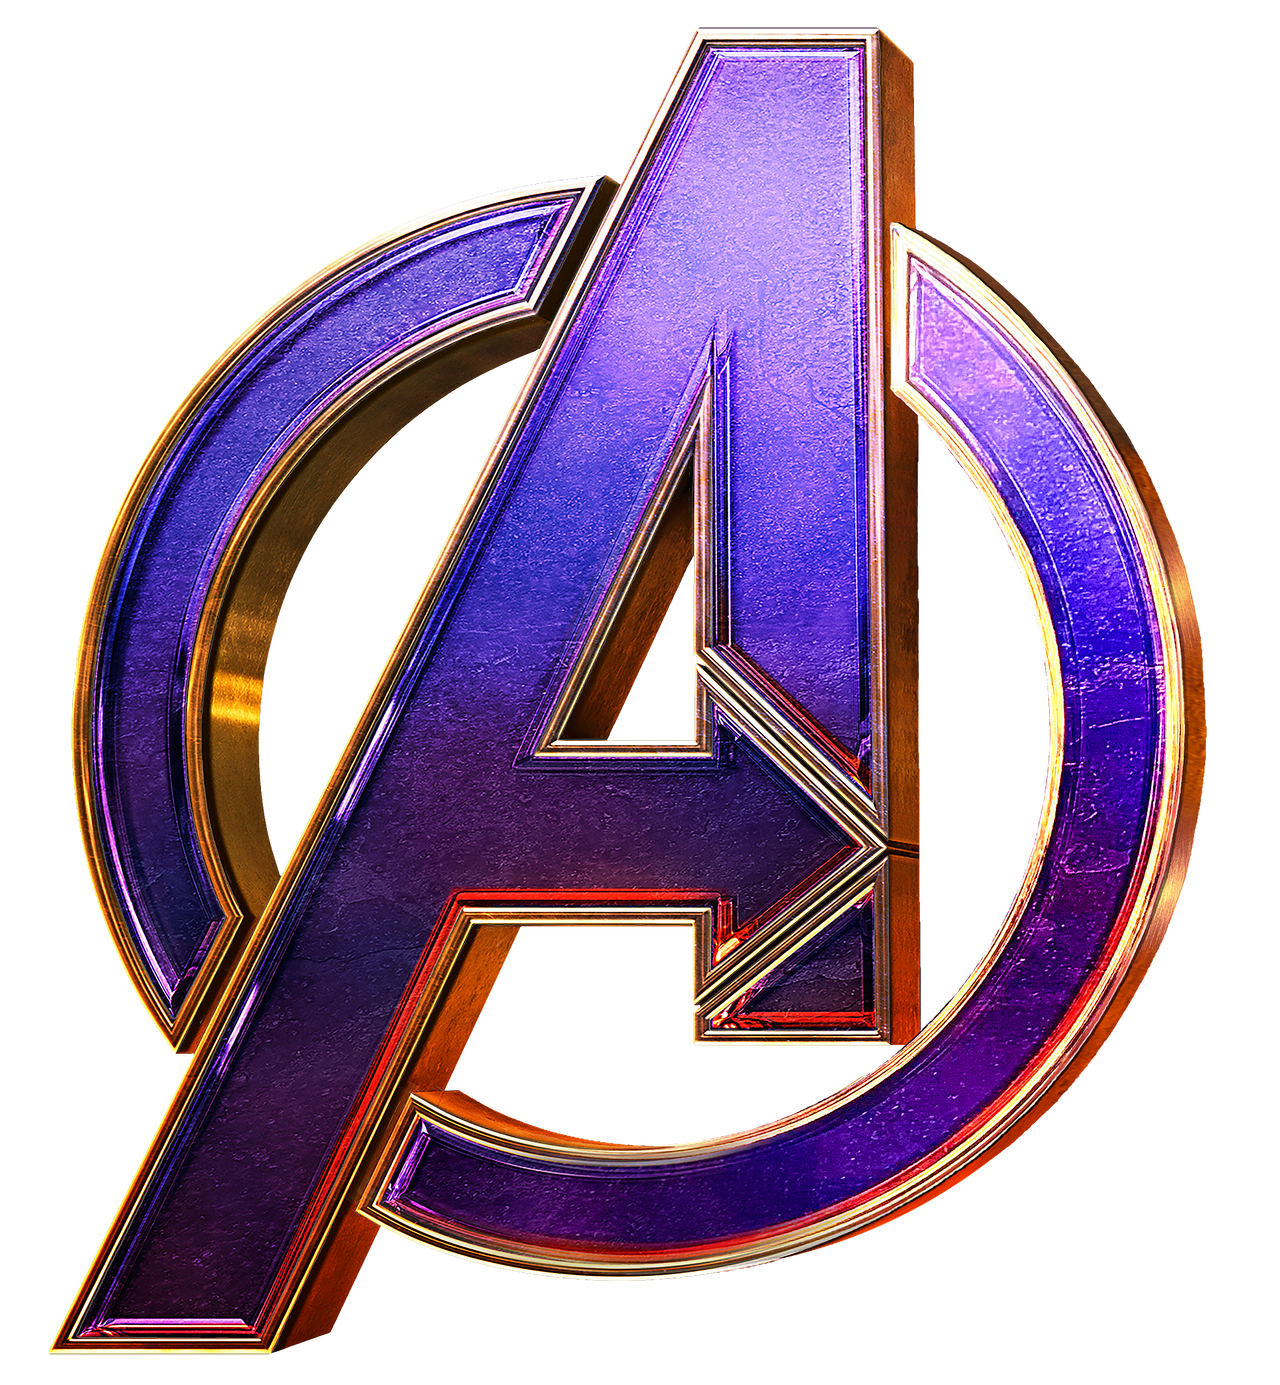 A Logo Avengers Letter HD Image Free PNG Image